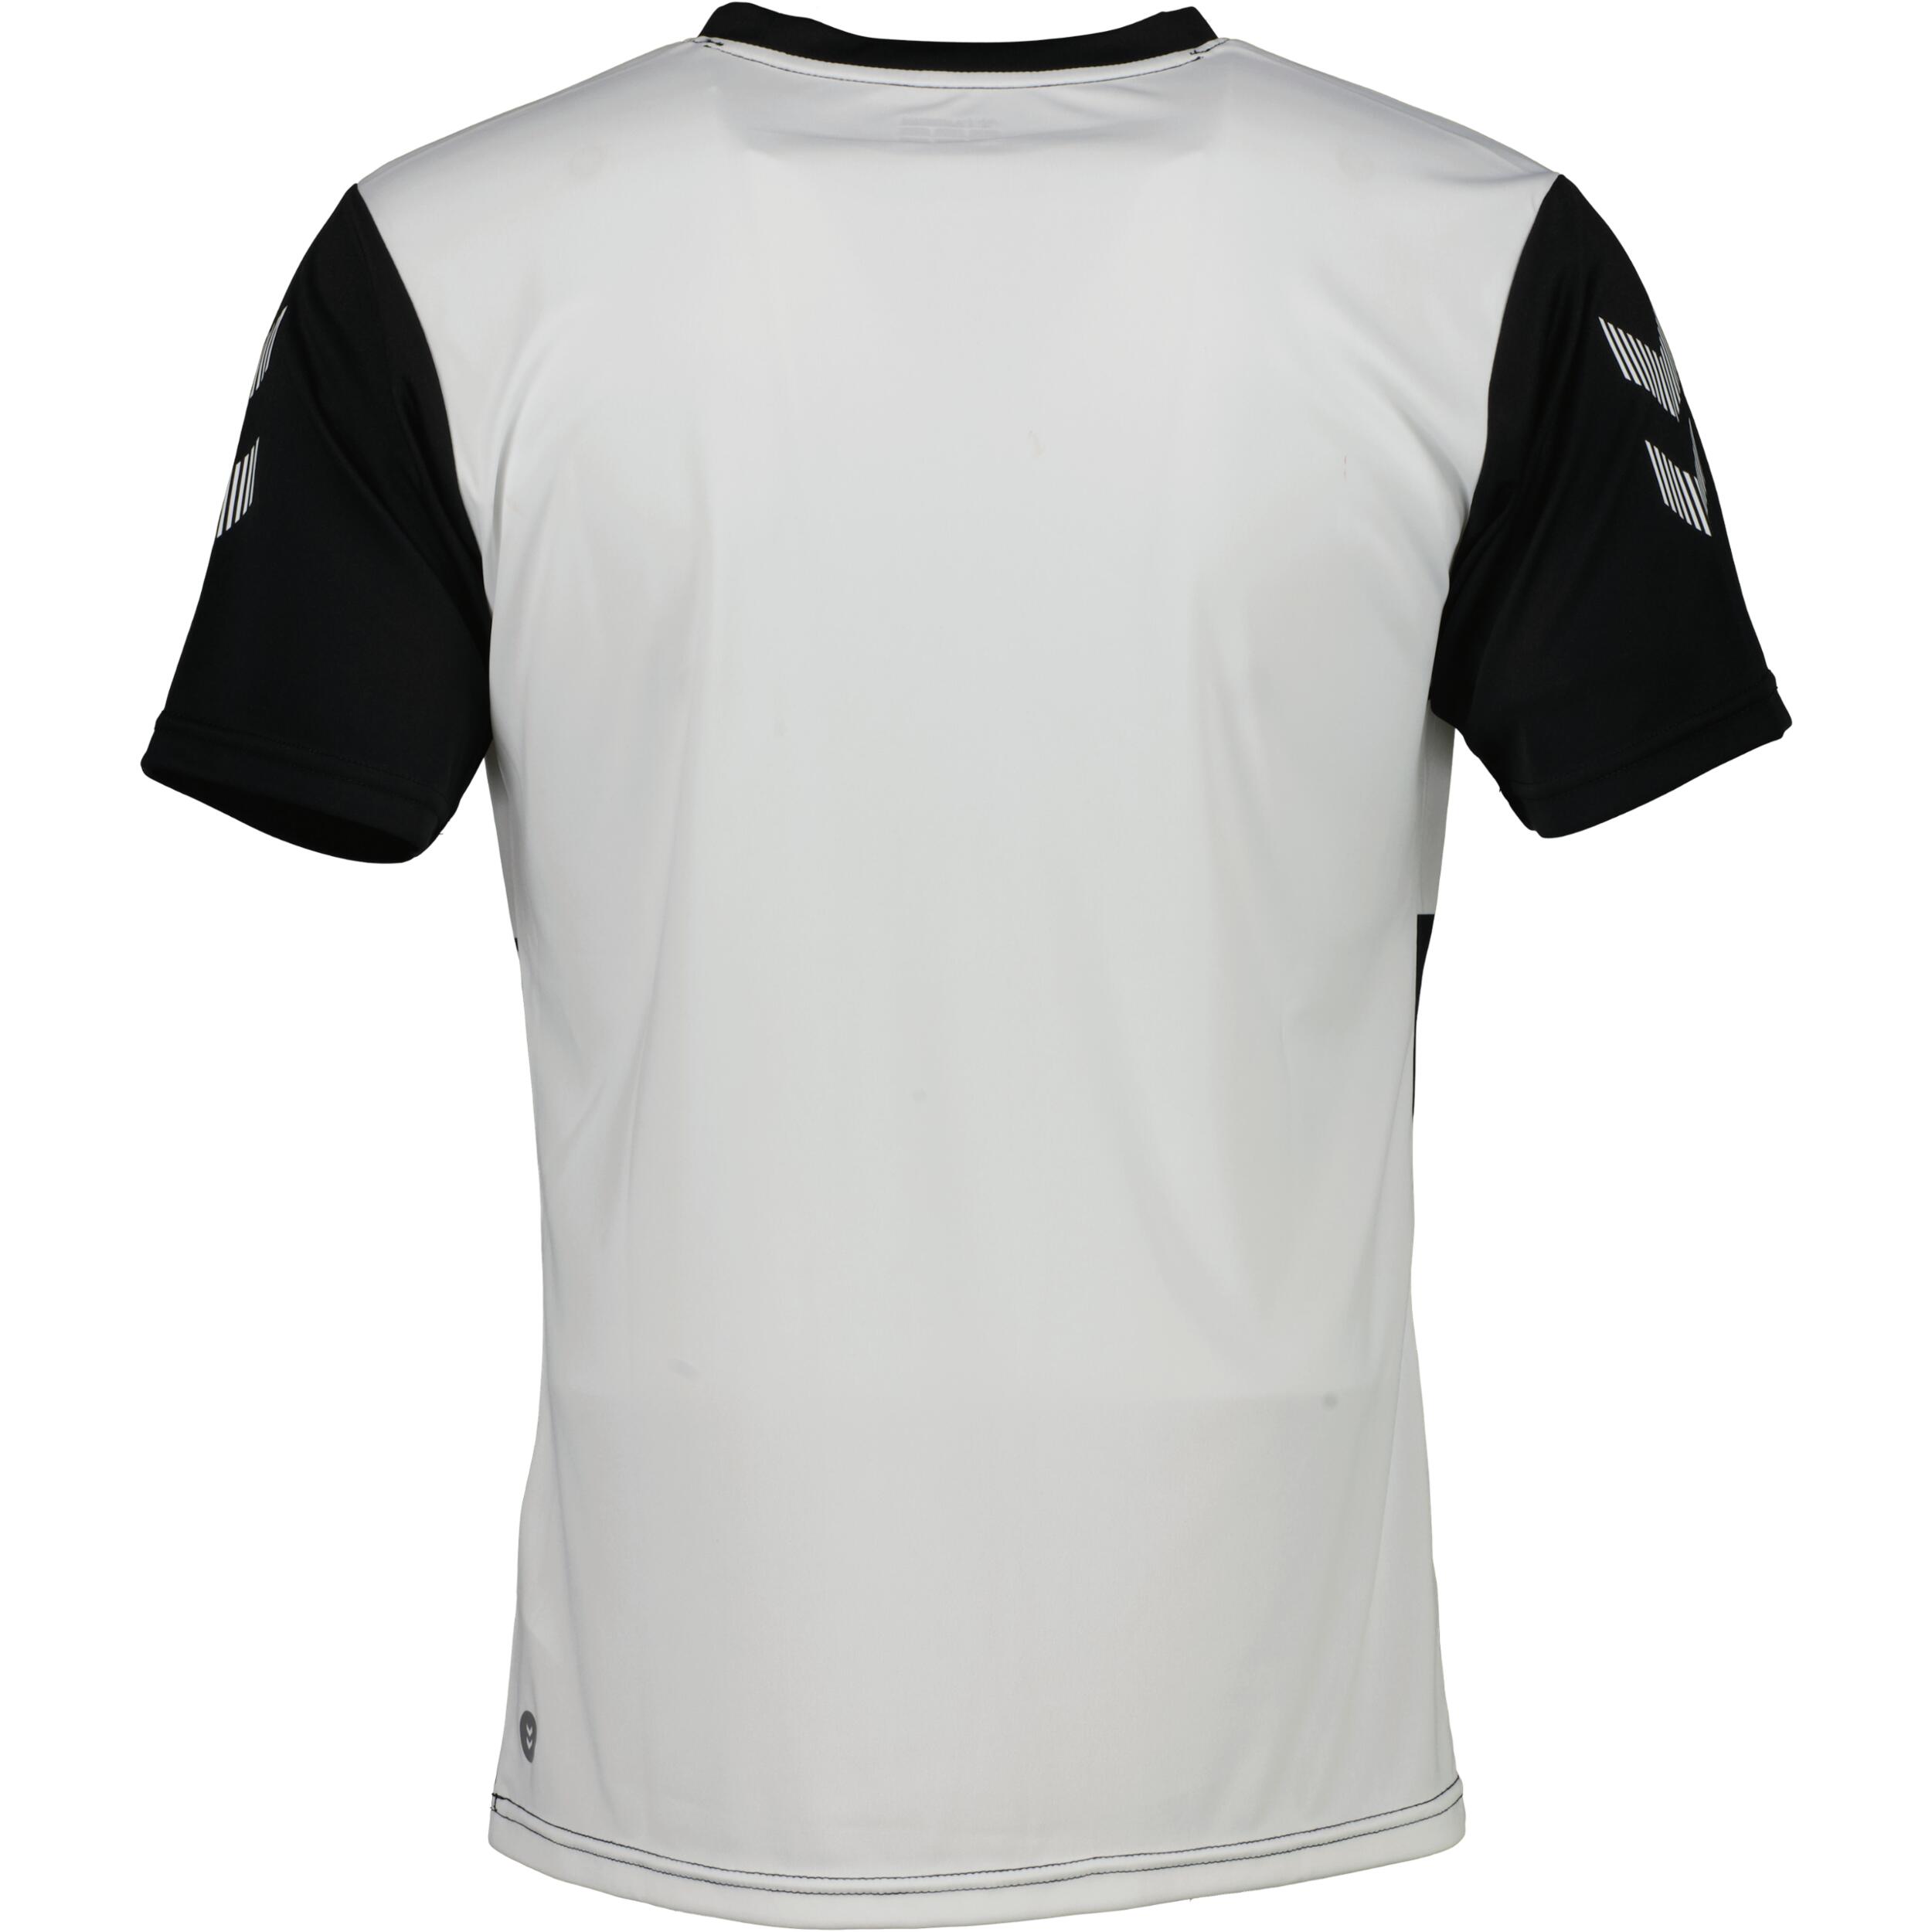 Hoop jersey for juniors, great for football, in black 2/3